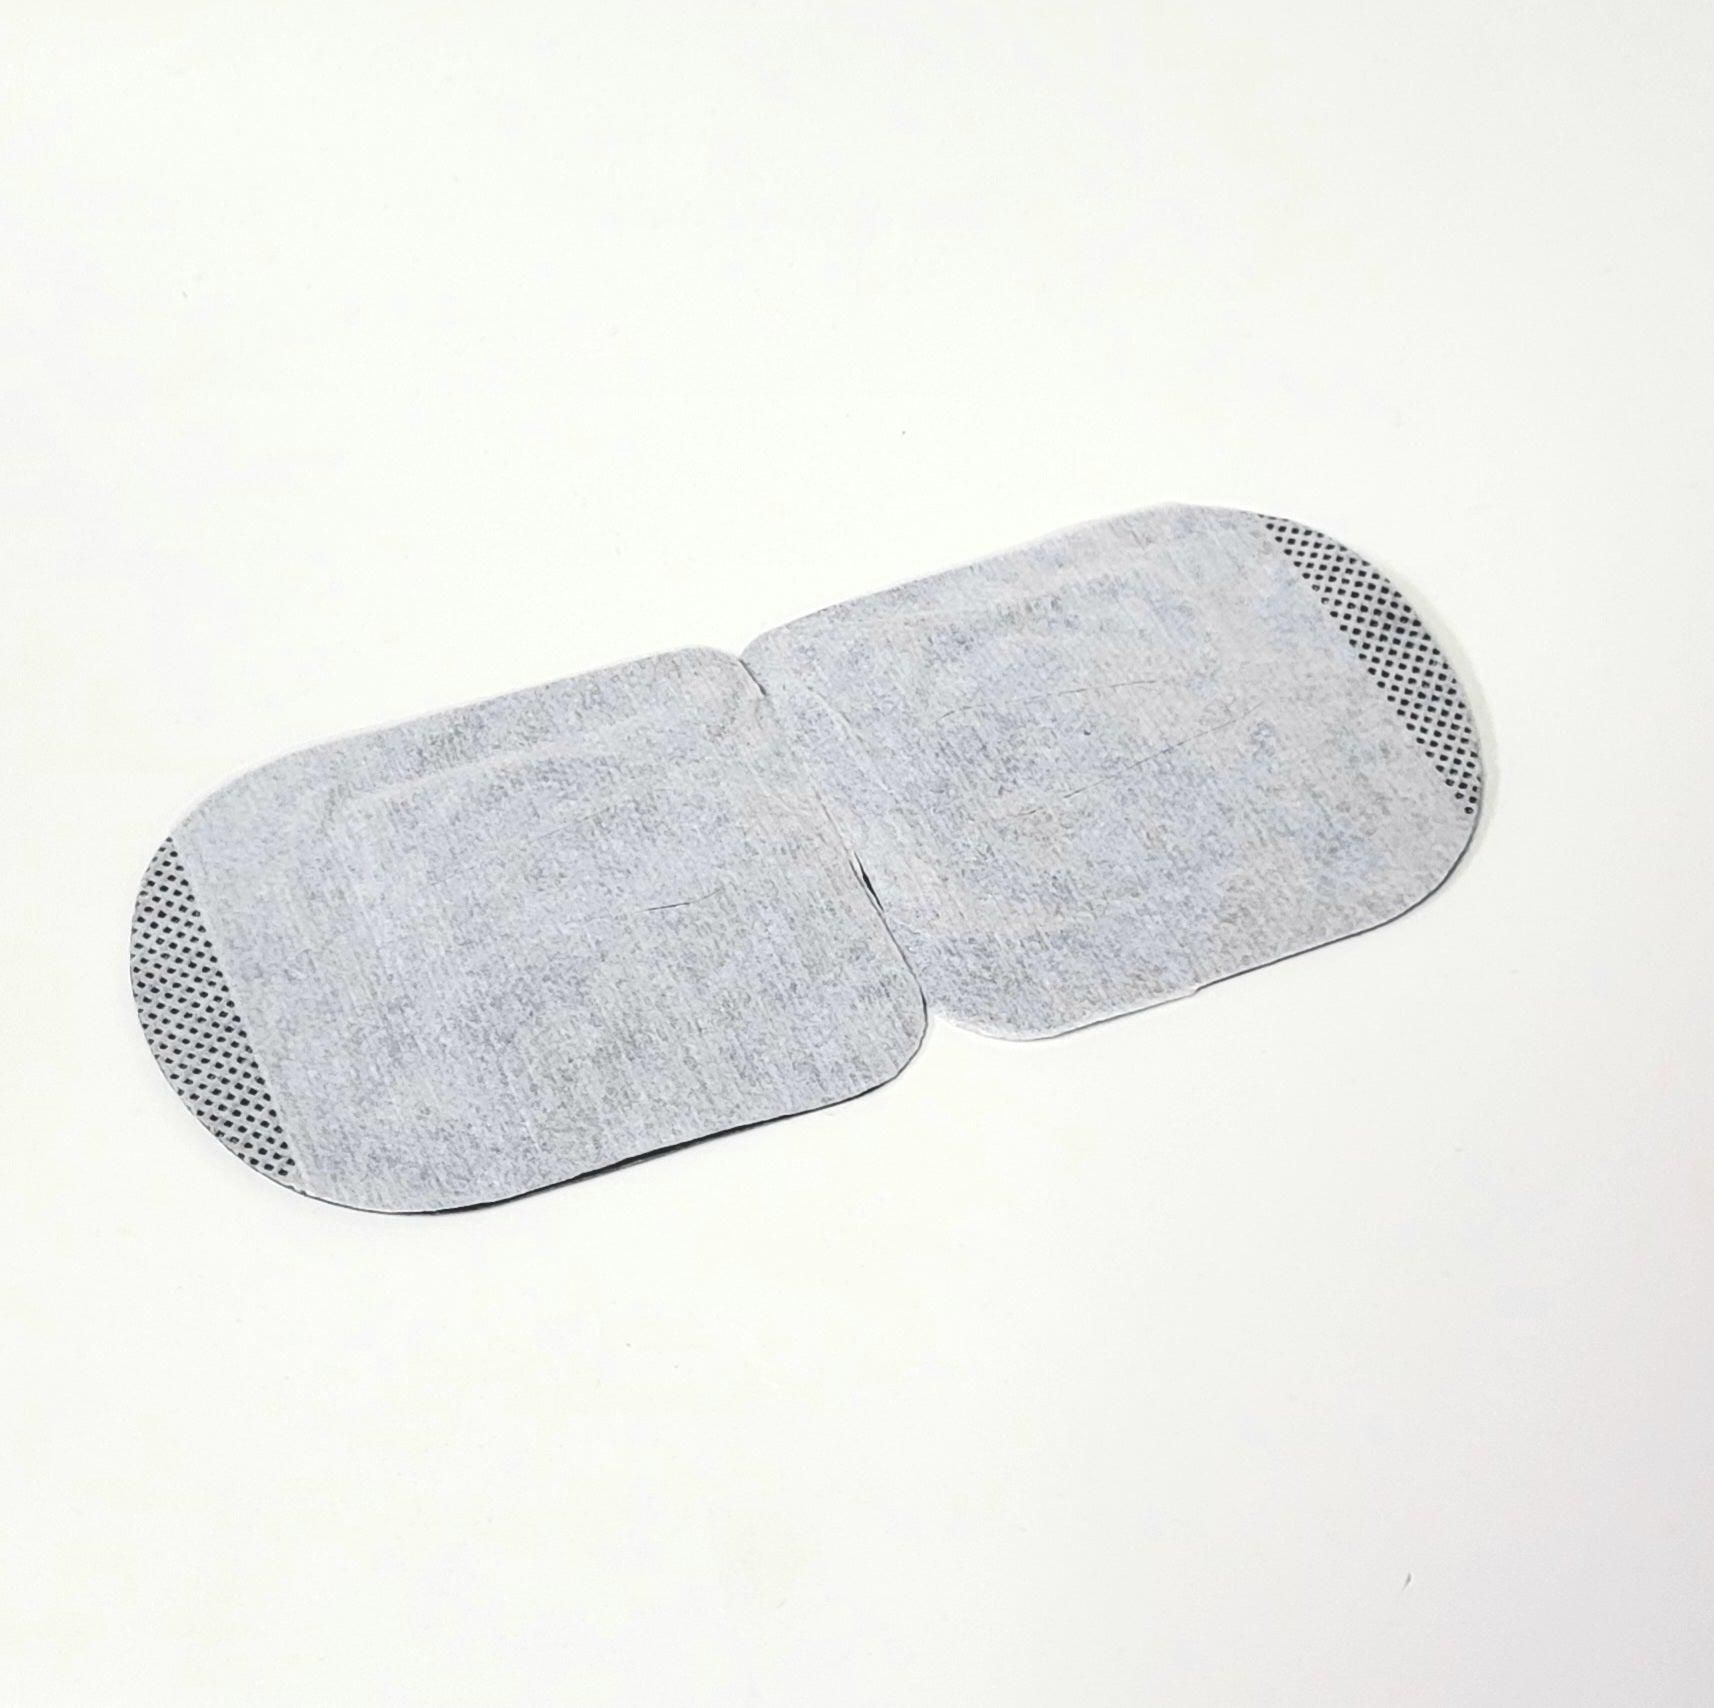 Discover the Luxury of Self-Care: Introducing Our Self-Heating Eye Mask - ZAQ Skin & Body